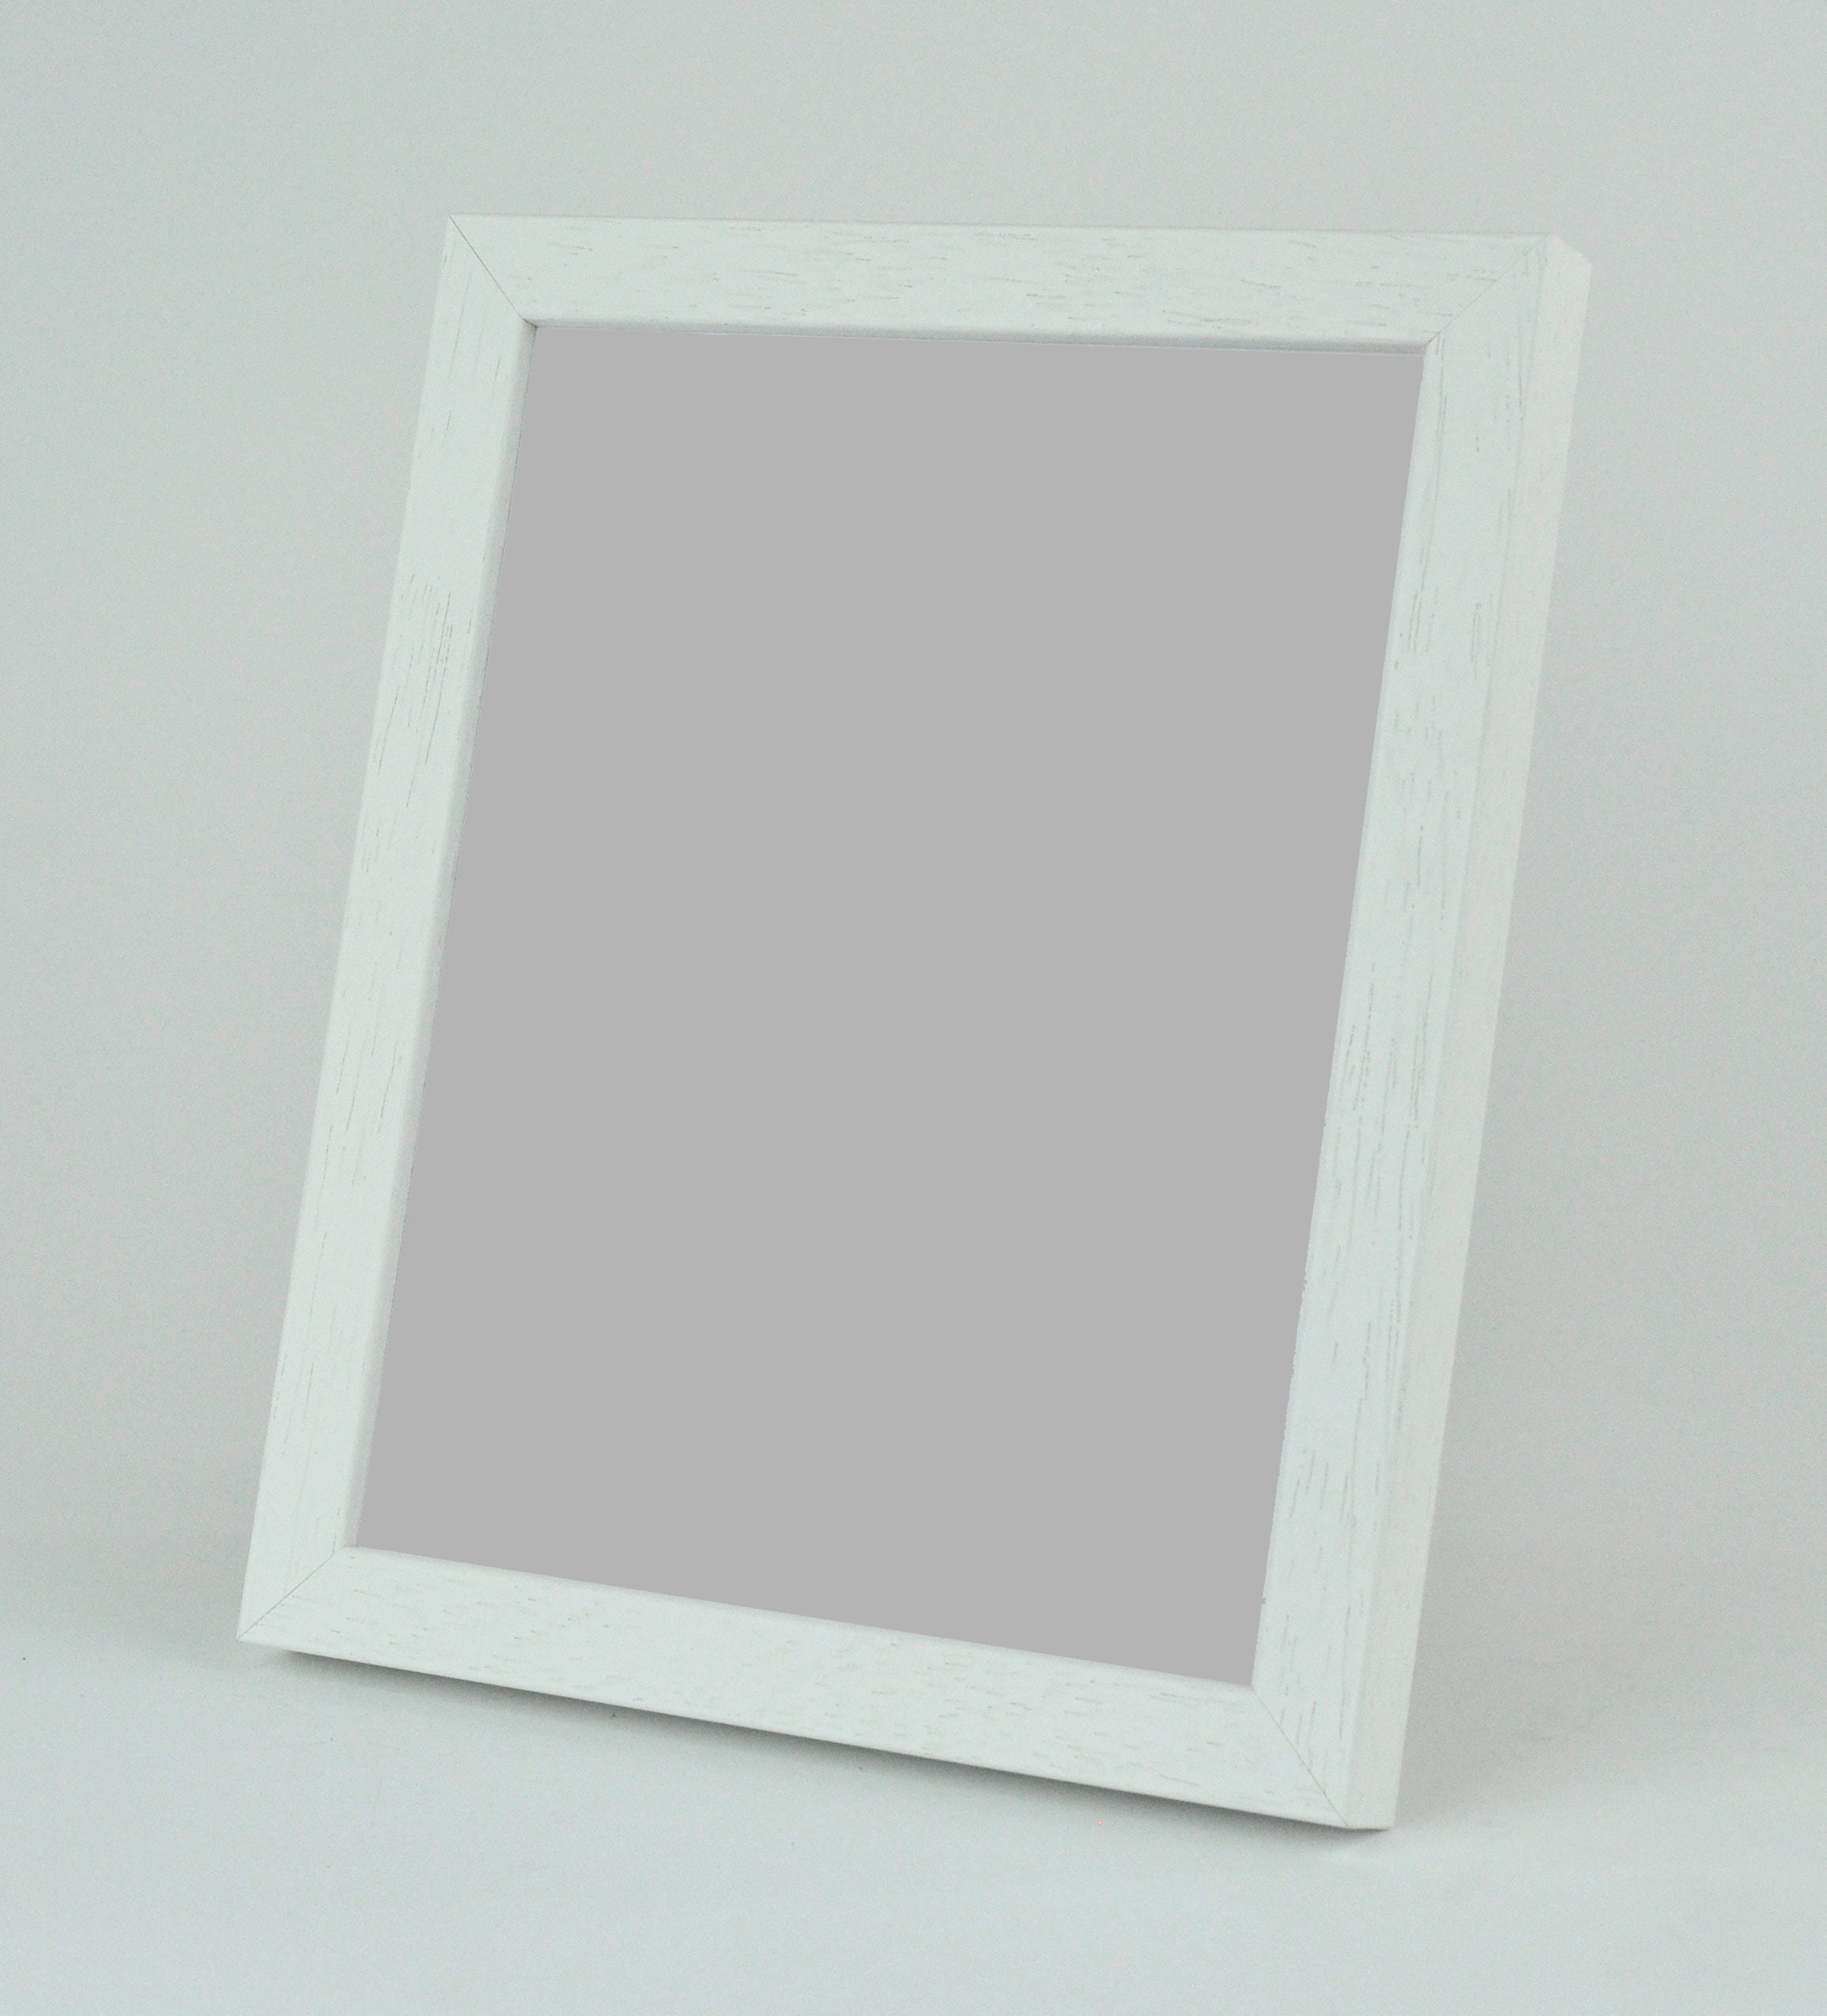 Frame Smart Pack of 4 White picture/photo mounts size A4 for 9x6 inches 